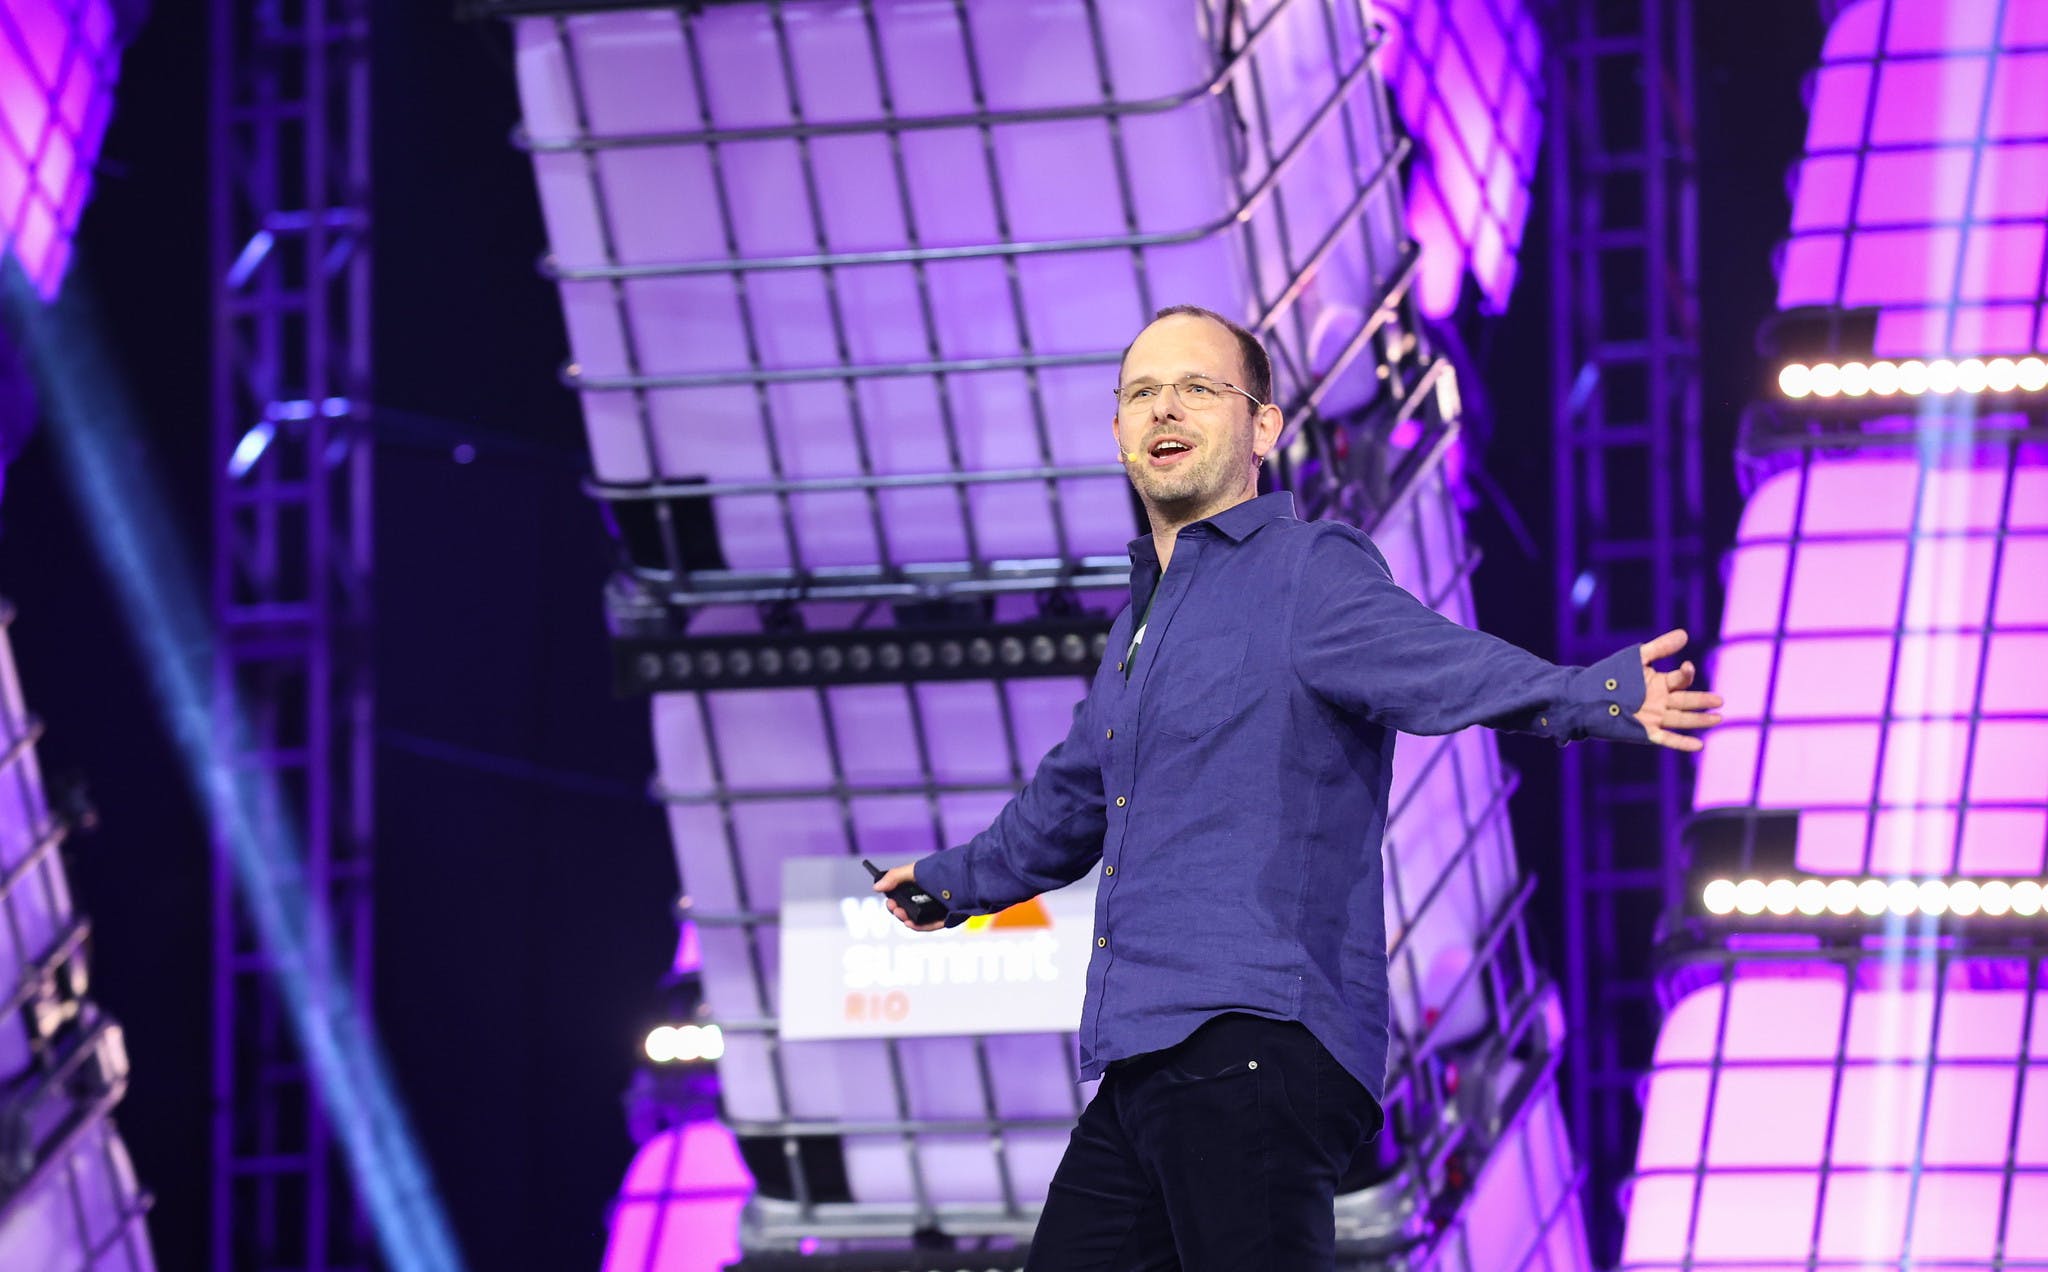 A person (GitHub CEO Thomas Dohmke) walks across a stage. Pictured from the knees up, Thomas is wearing a headset mic and holding a presentation clicker in one hand. Thomas's arms are outstretched. Thomas appears to be speaking.